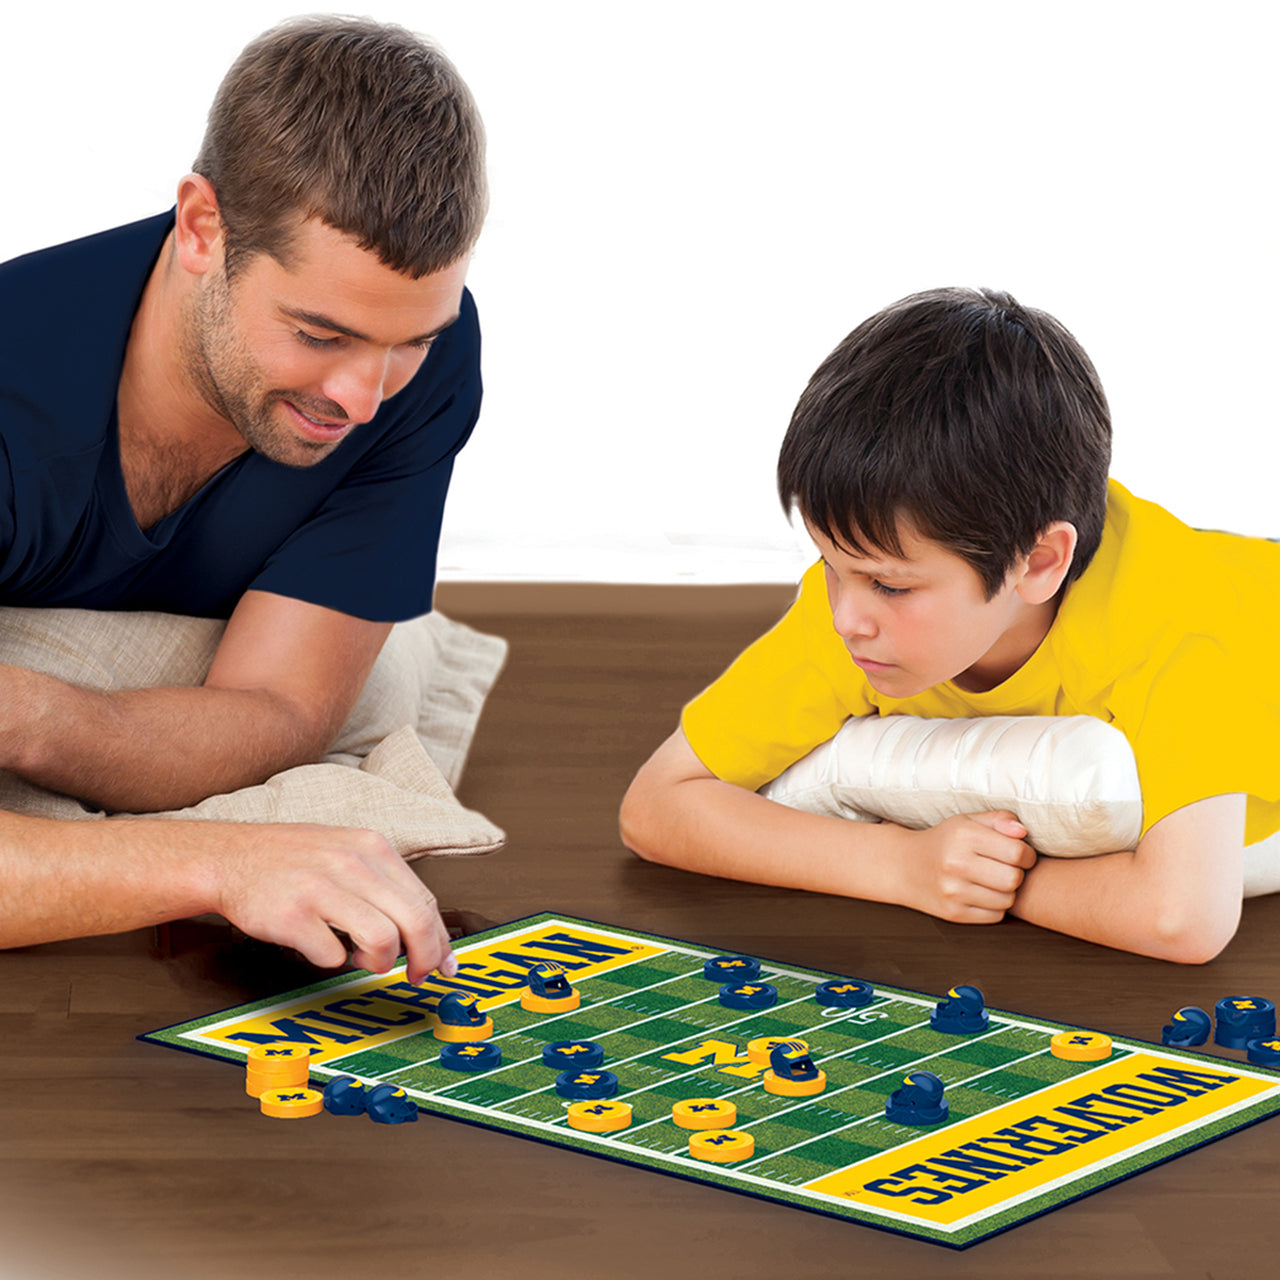 Michigan Wolverines Checkers Board Game by Masterpieces